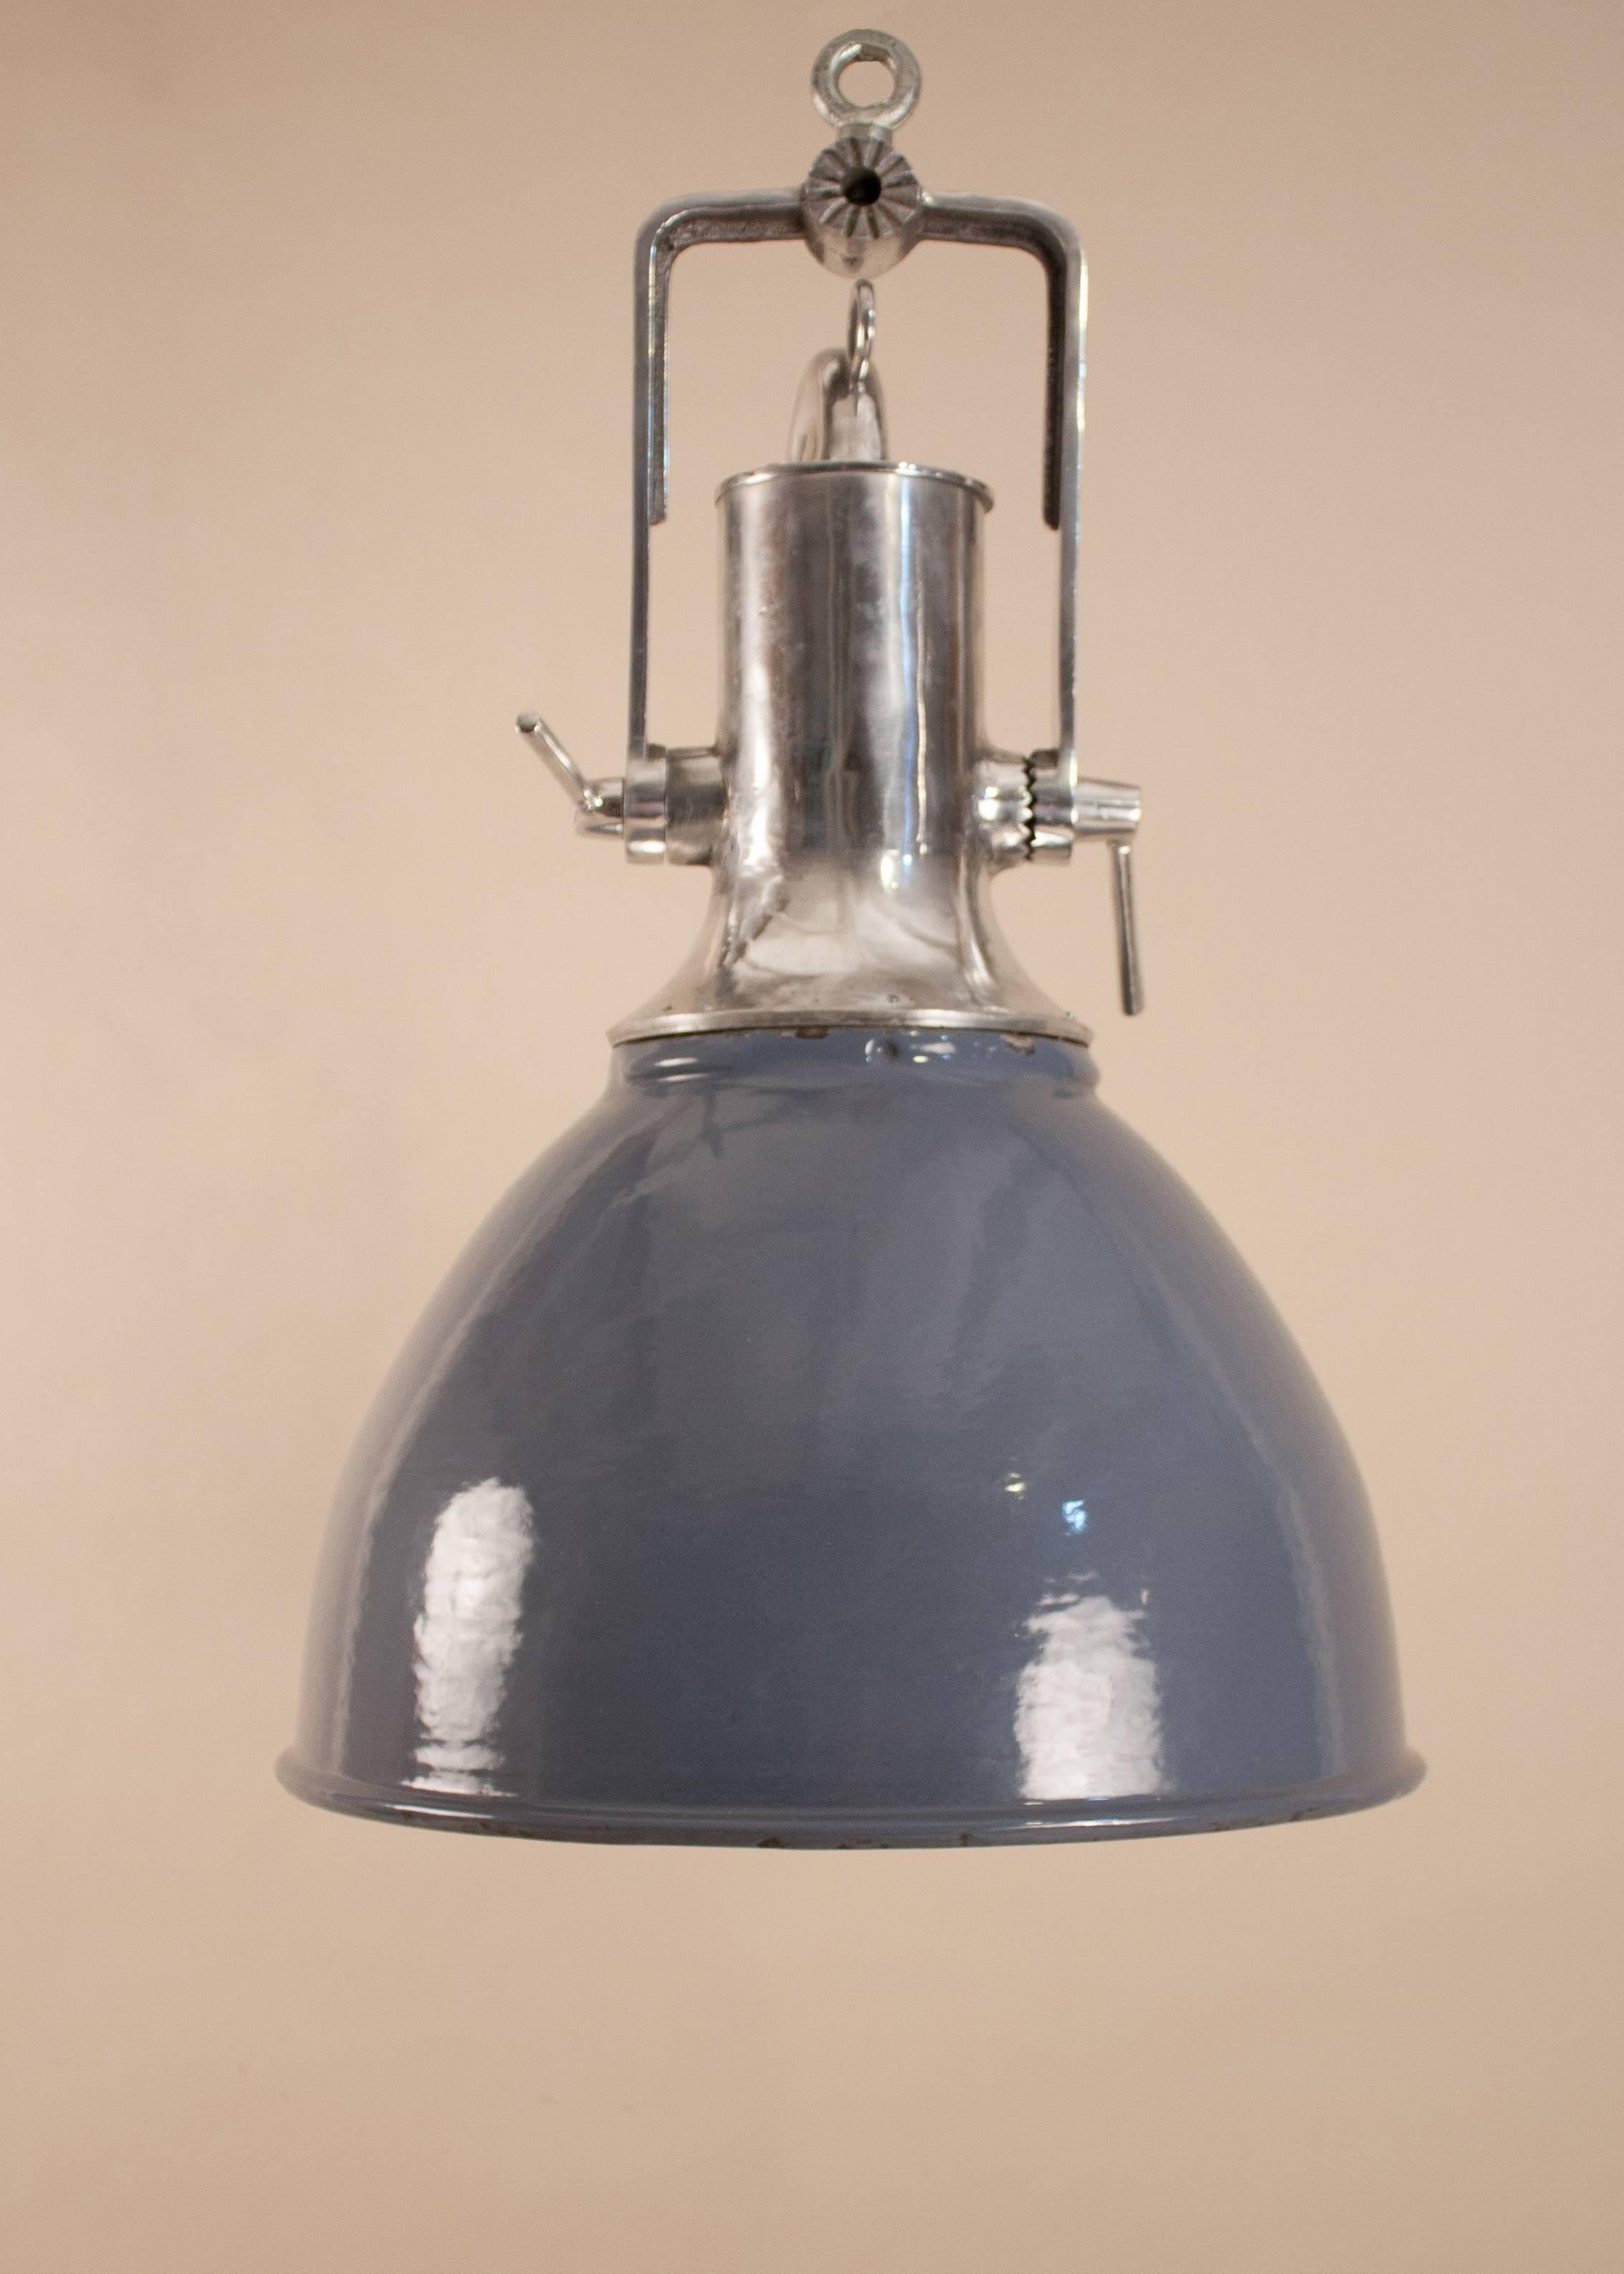 Good-looking large Industrial floodlight in an attractive combination of warm gray enamel and aluminum. The domed shade, which was salvaged from a maritime vessel, has minor blemishes on the gray enamel and white interior that enhance the